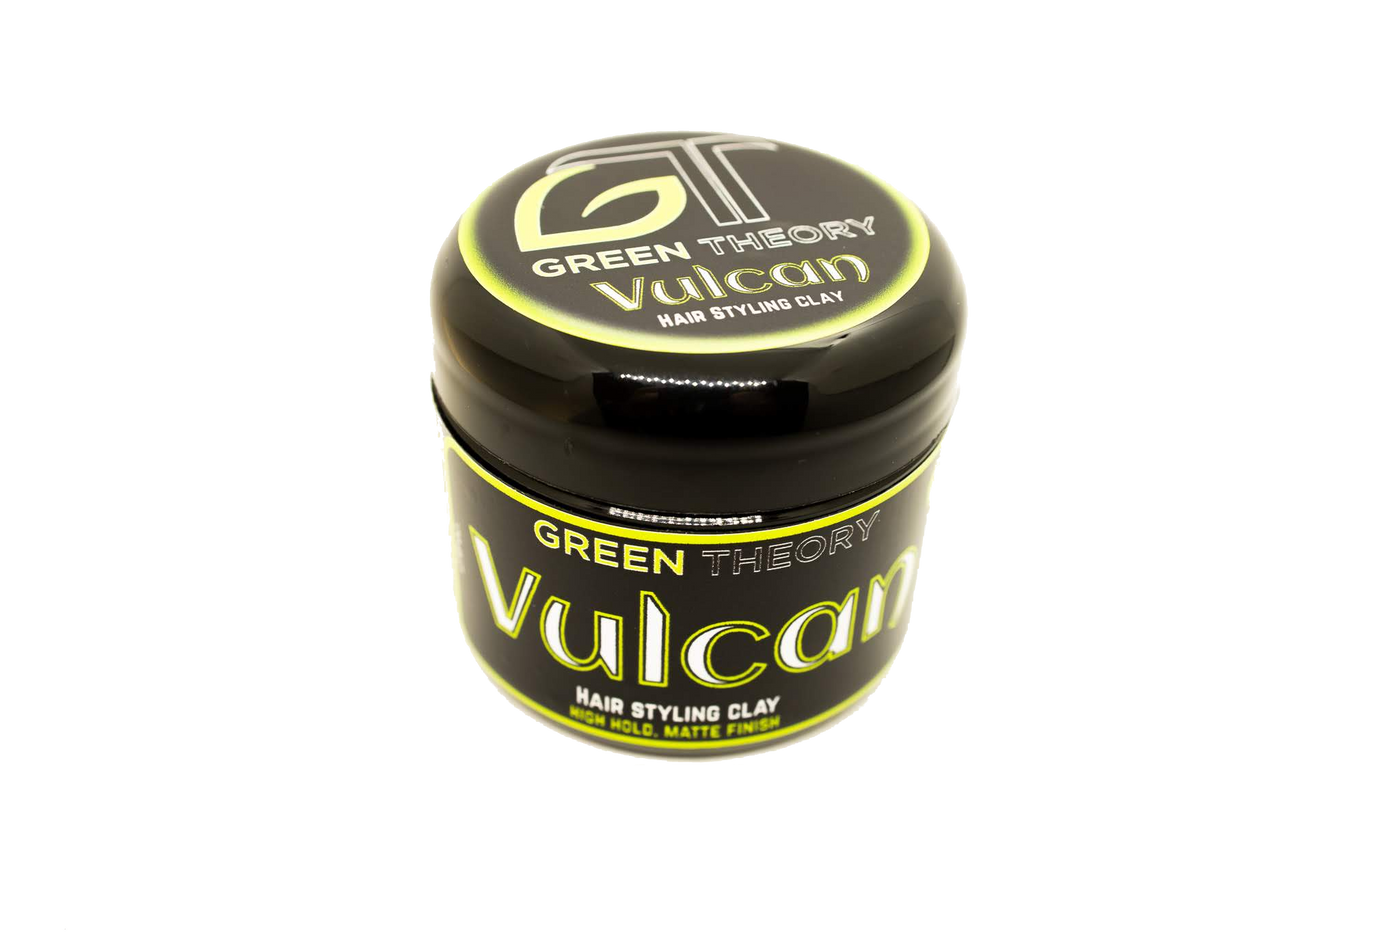 image of Green Theory Vulcan natural hair styling clay jar. Angle is slanted so that both the top of the jar label and side label are visible. Jar is shiny black with a screw off style lid. 